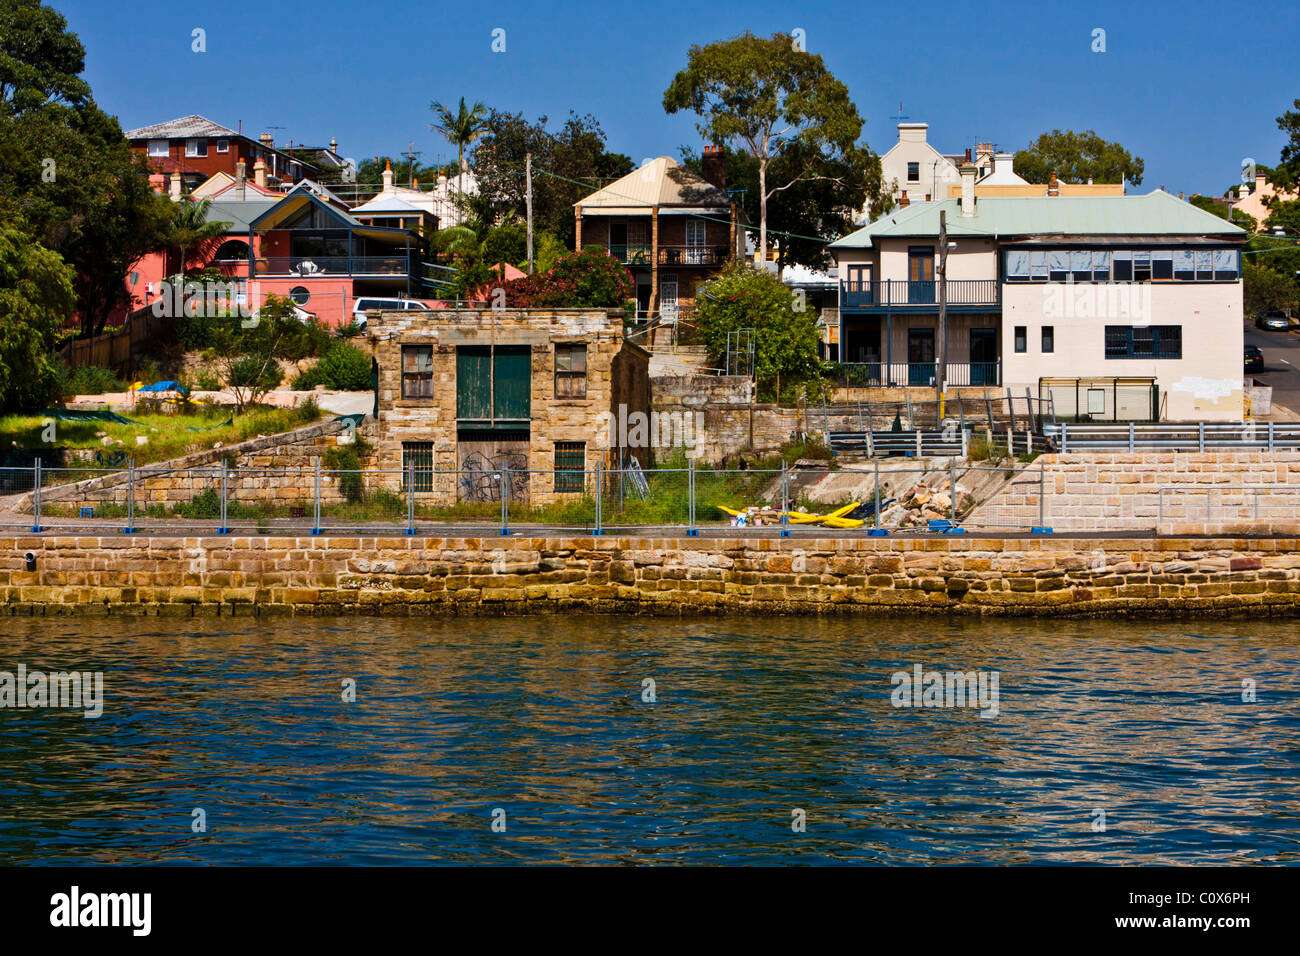 An old Sandstone cottage built on the harbourside at Balmain, NSW,  Australia Stock Photo - Alamy